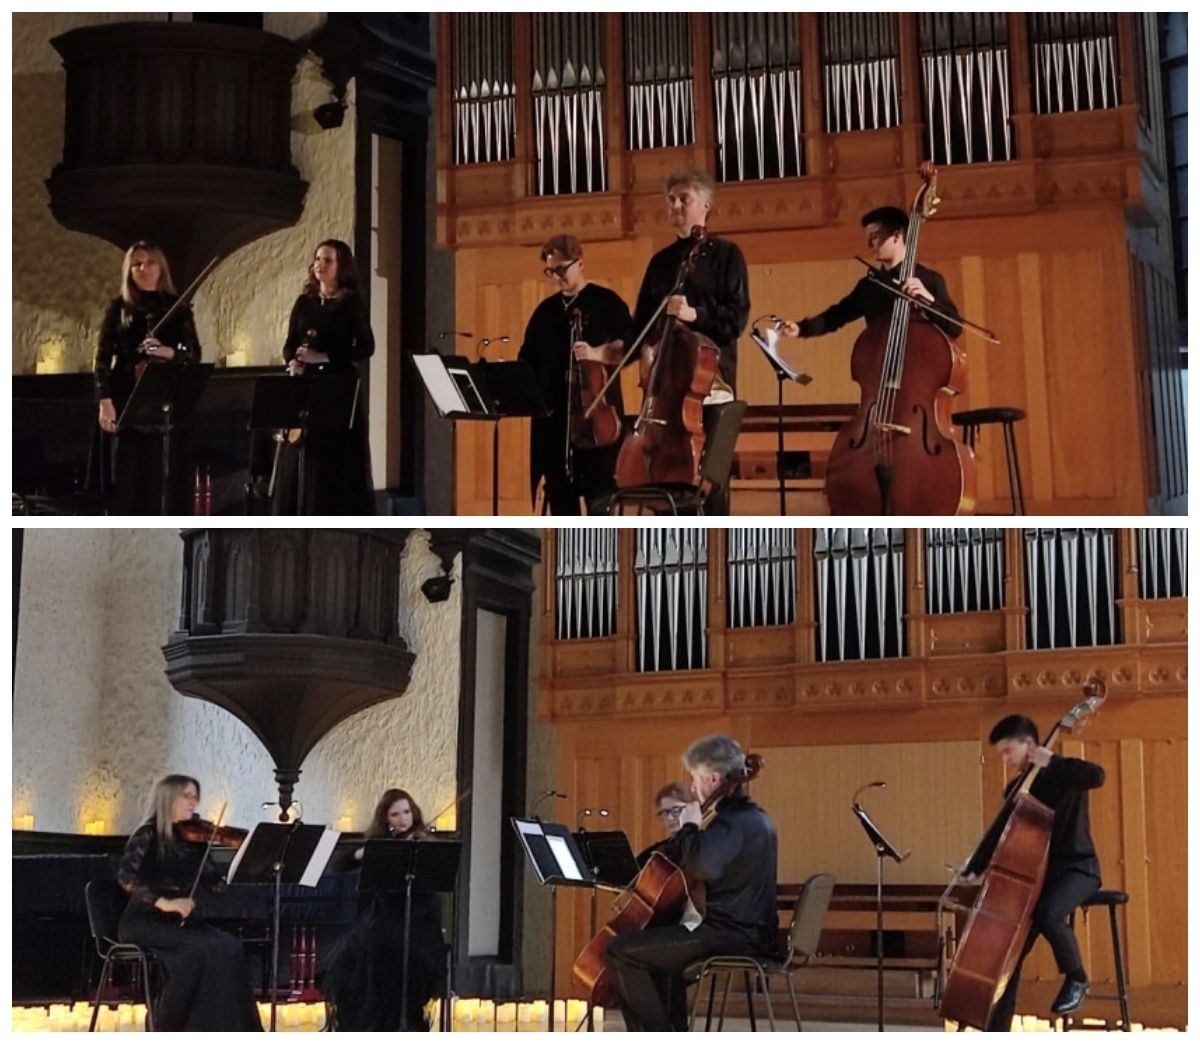 Mystery Ensemble delights audience with Mozart's music [PHOTOS]